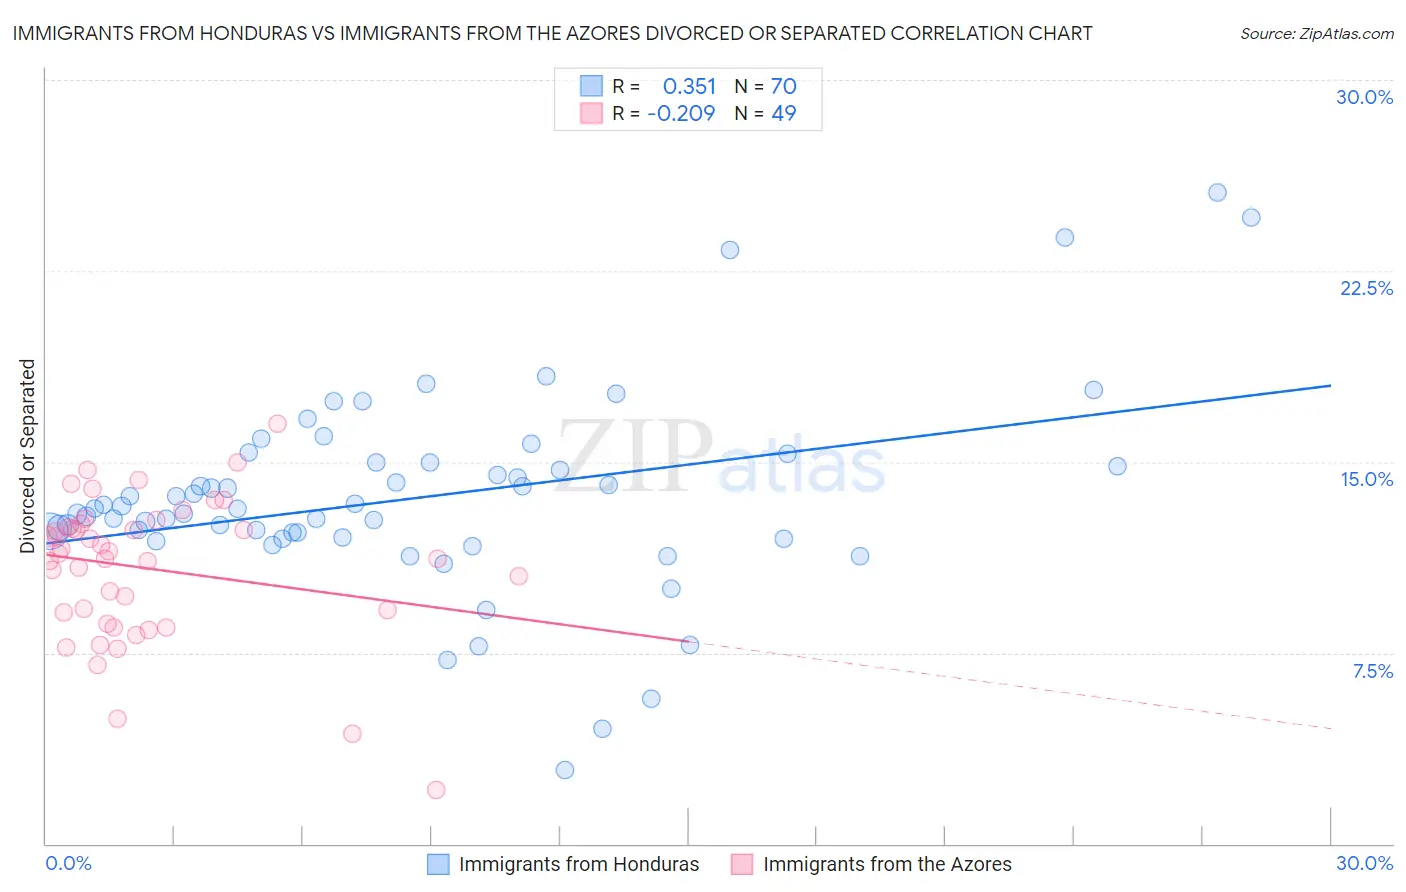 Immigrants from Honduras vs Immigrants from the Azores Divorced or Separated